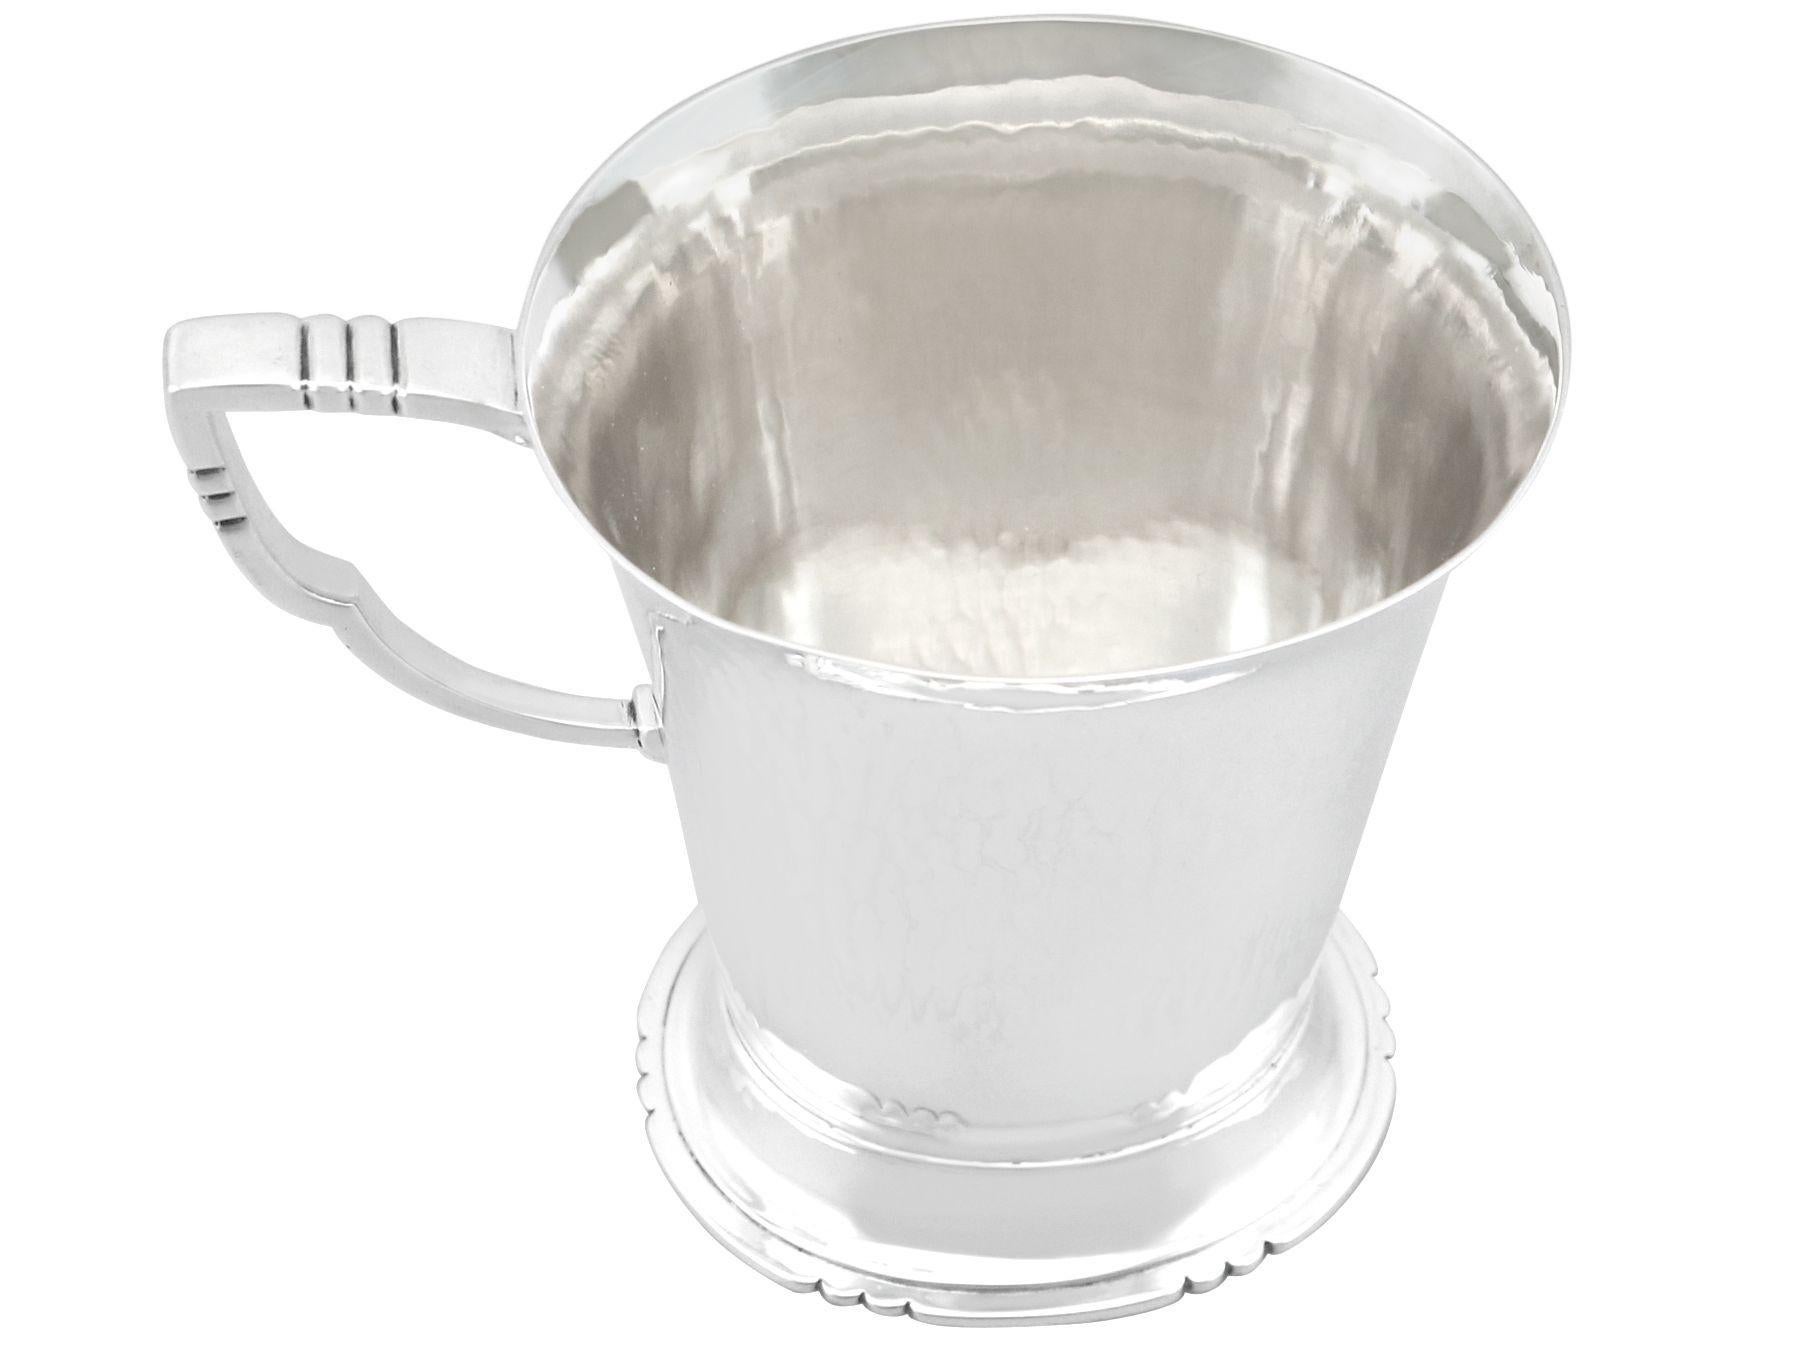 An exceptional, fine and impressive antique George VI English sterling silver christening mug made by R. E. Stone; an addition to our 20th century silverware collection.

This exceptional antique George VI sterling silver mug has a plain oval